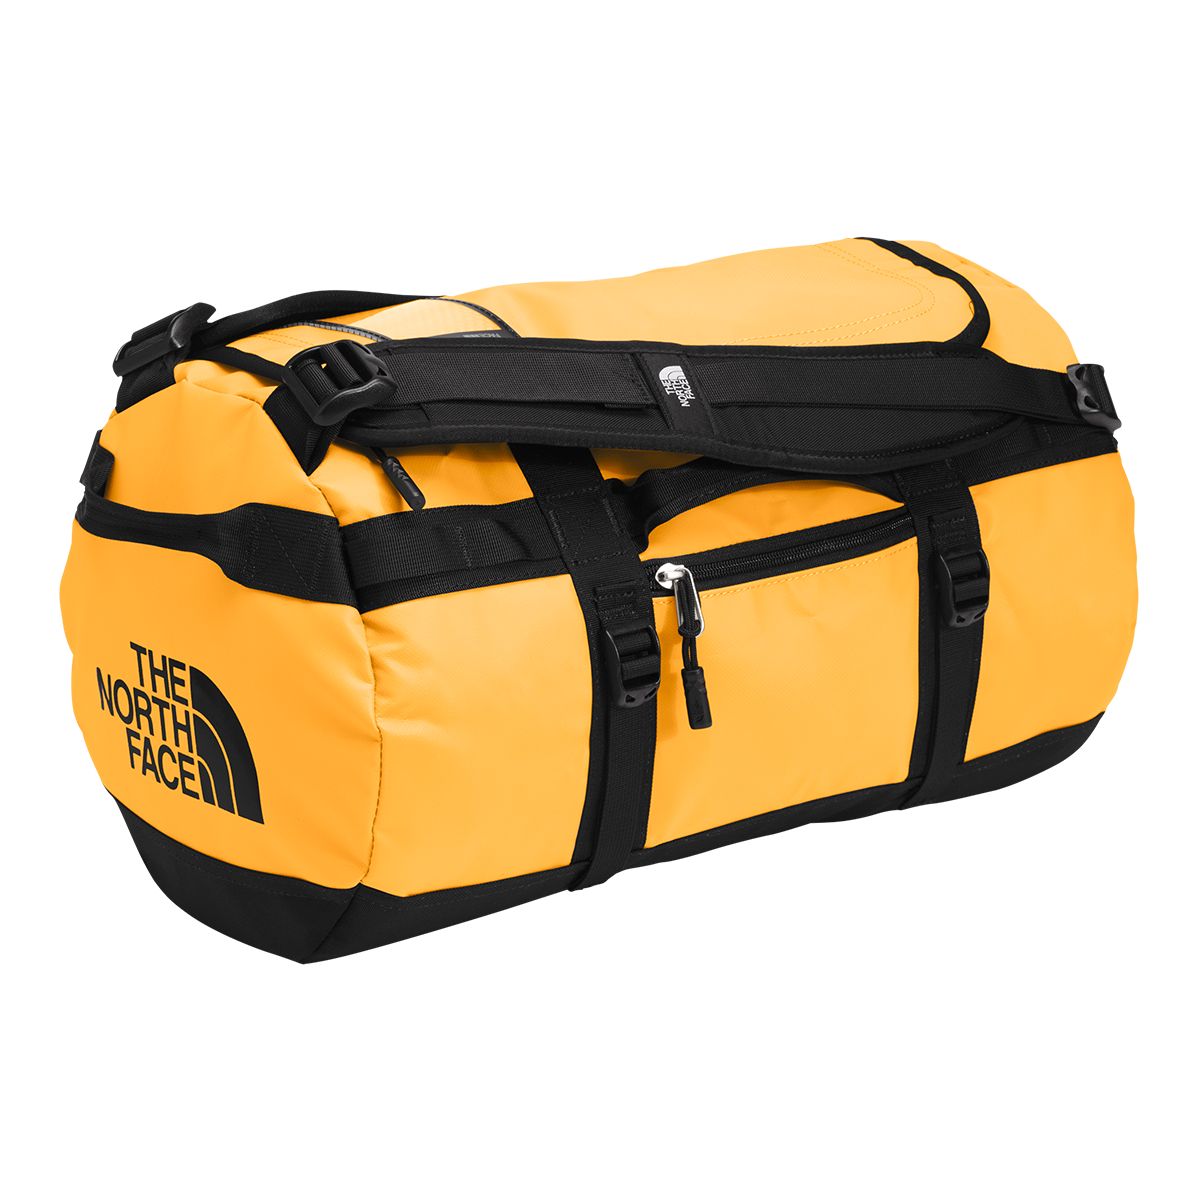 The North Face Base Camp 31L Duffel